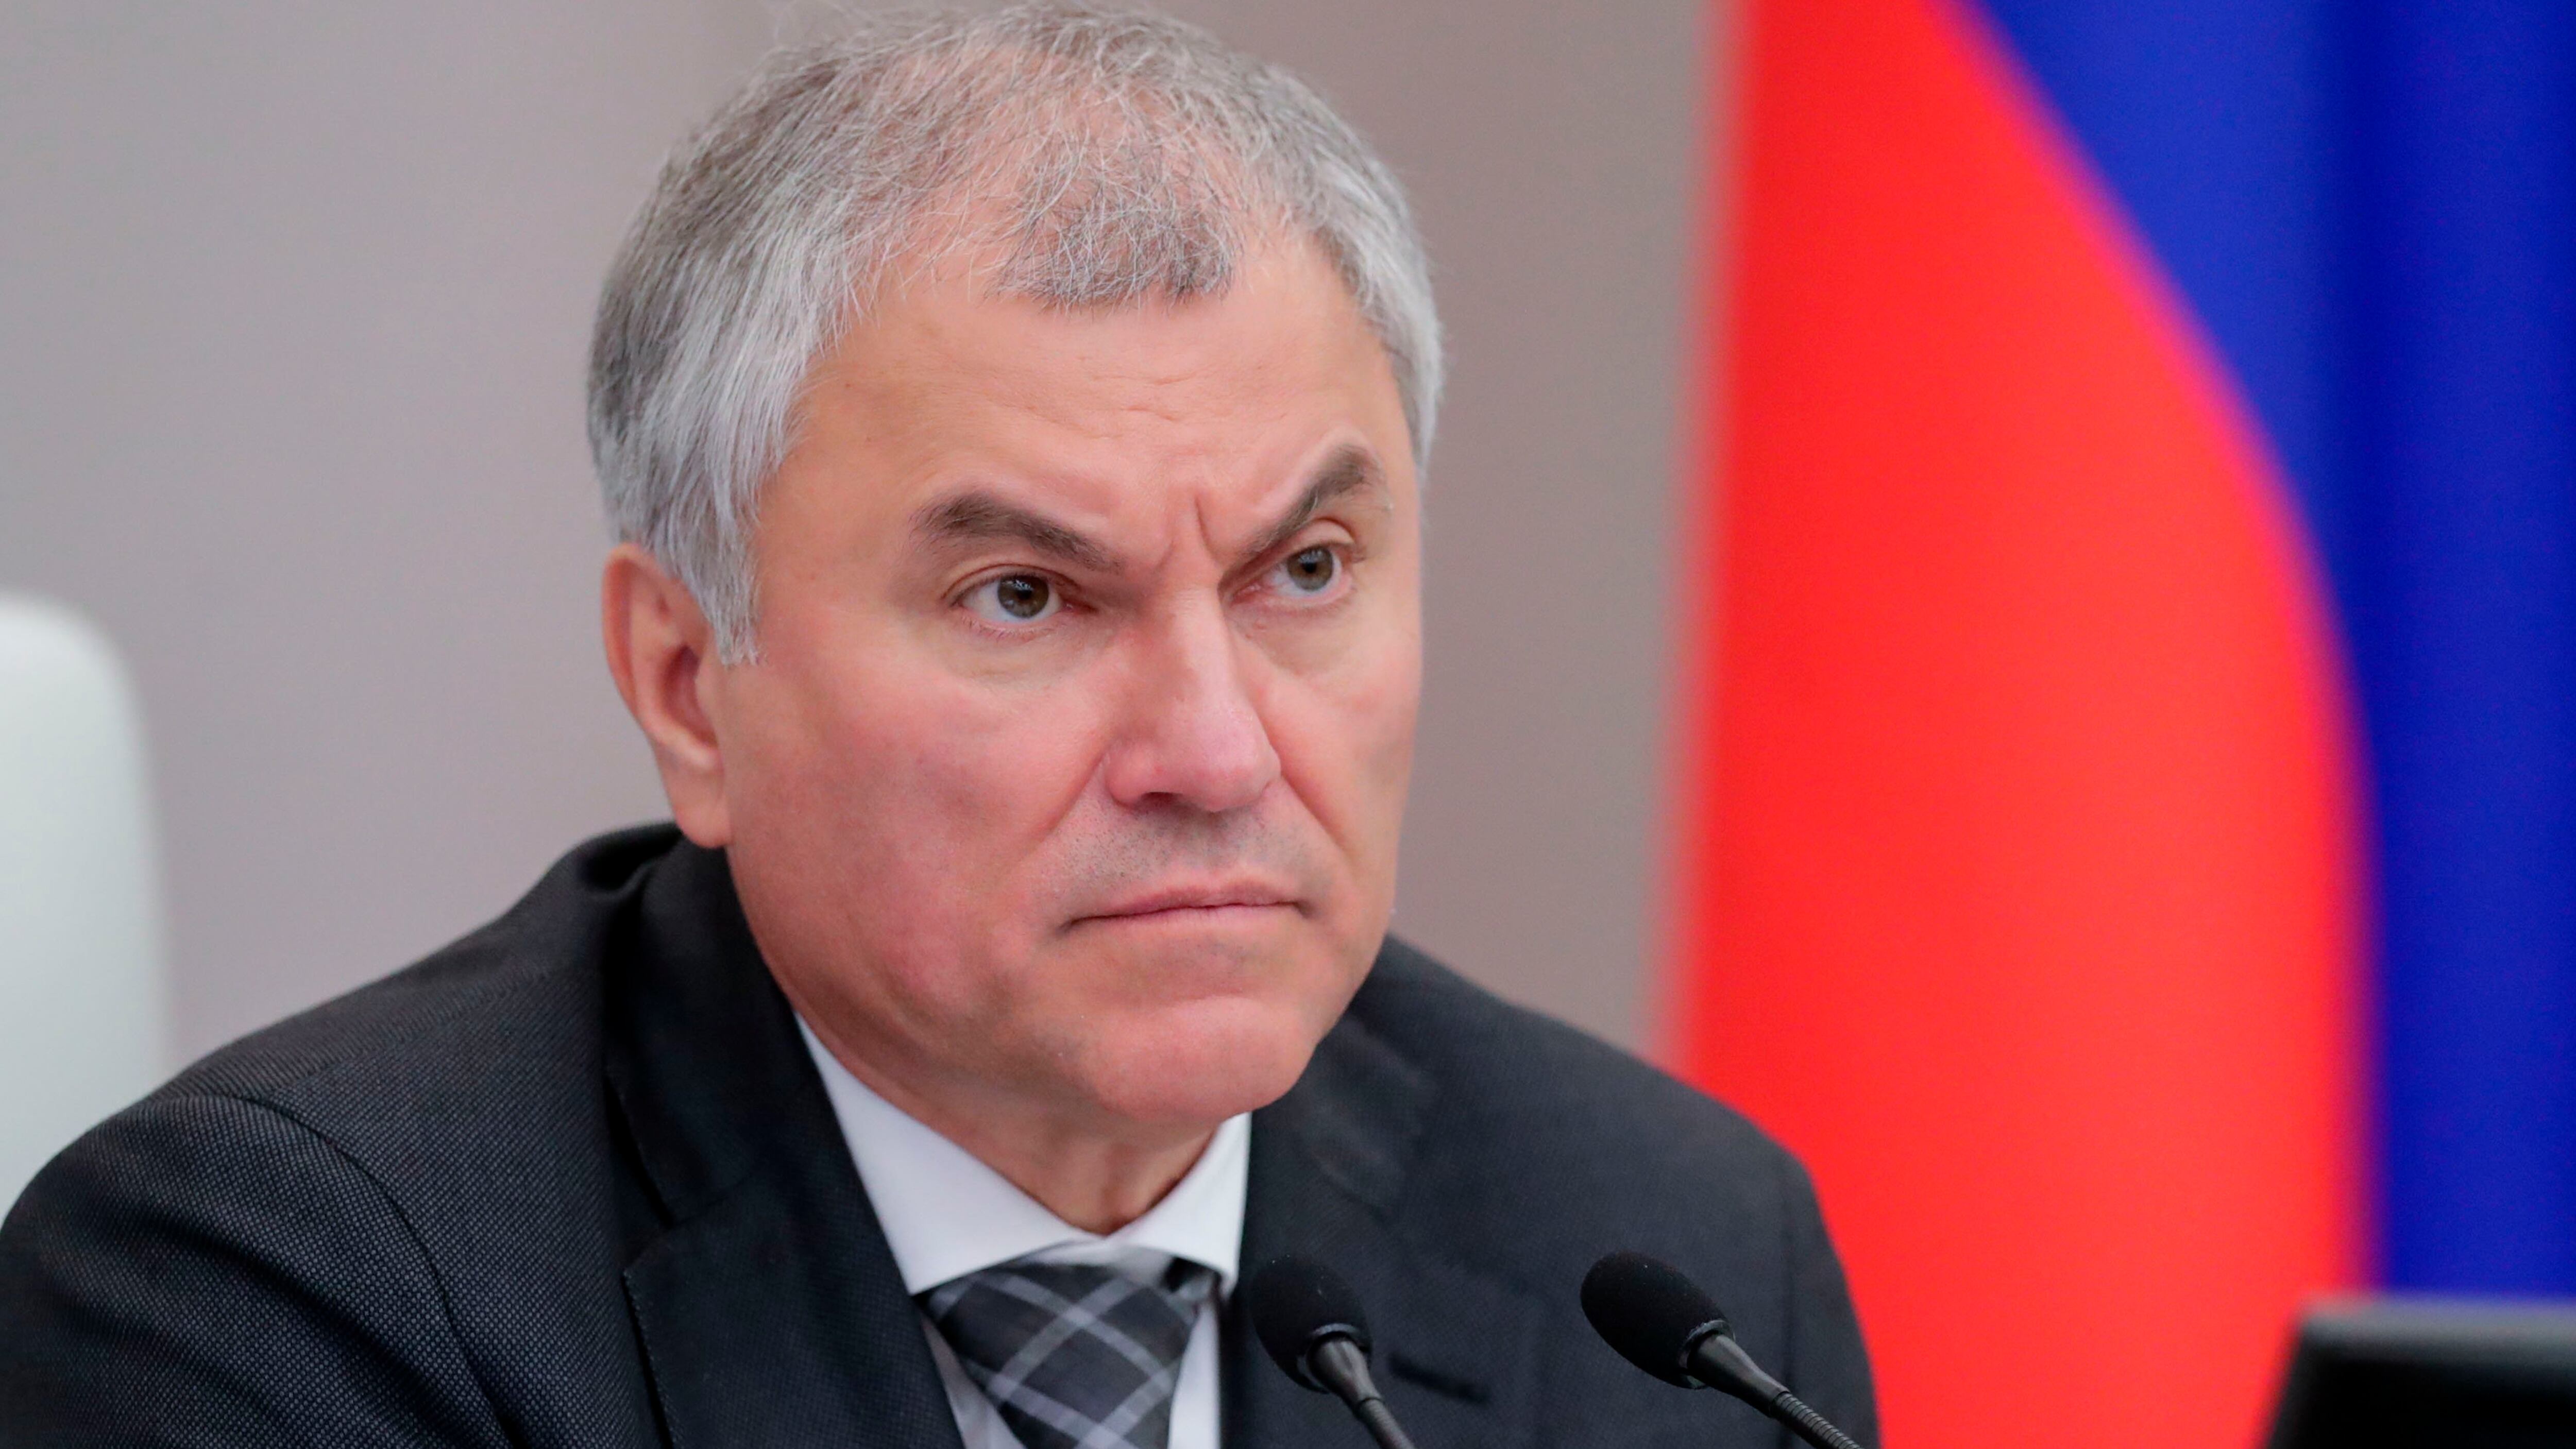 Vyacheslav Volodin has unveiled plans for a new crackdown on dissent (The State Duma, the Lower House of the Russian Parliament via AP)